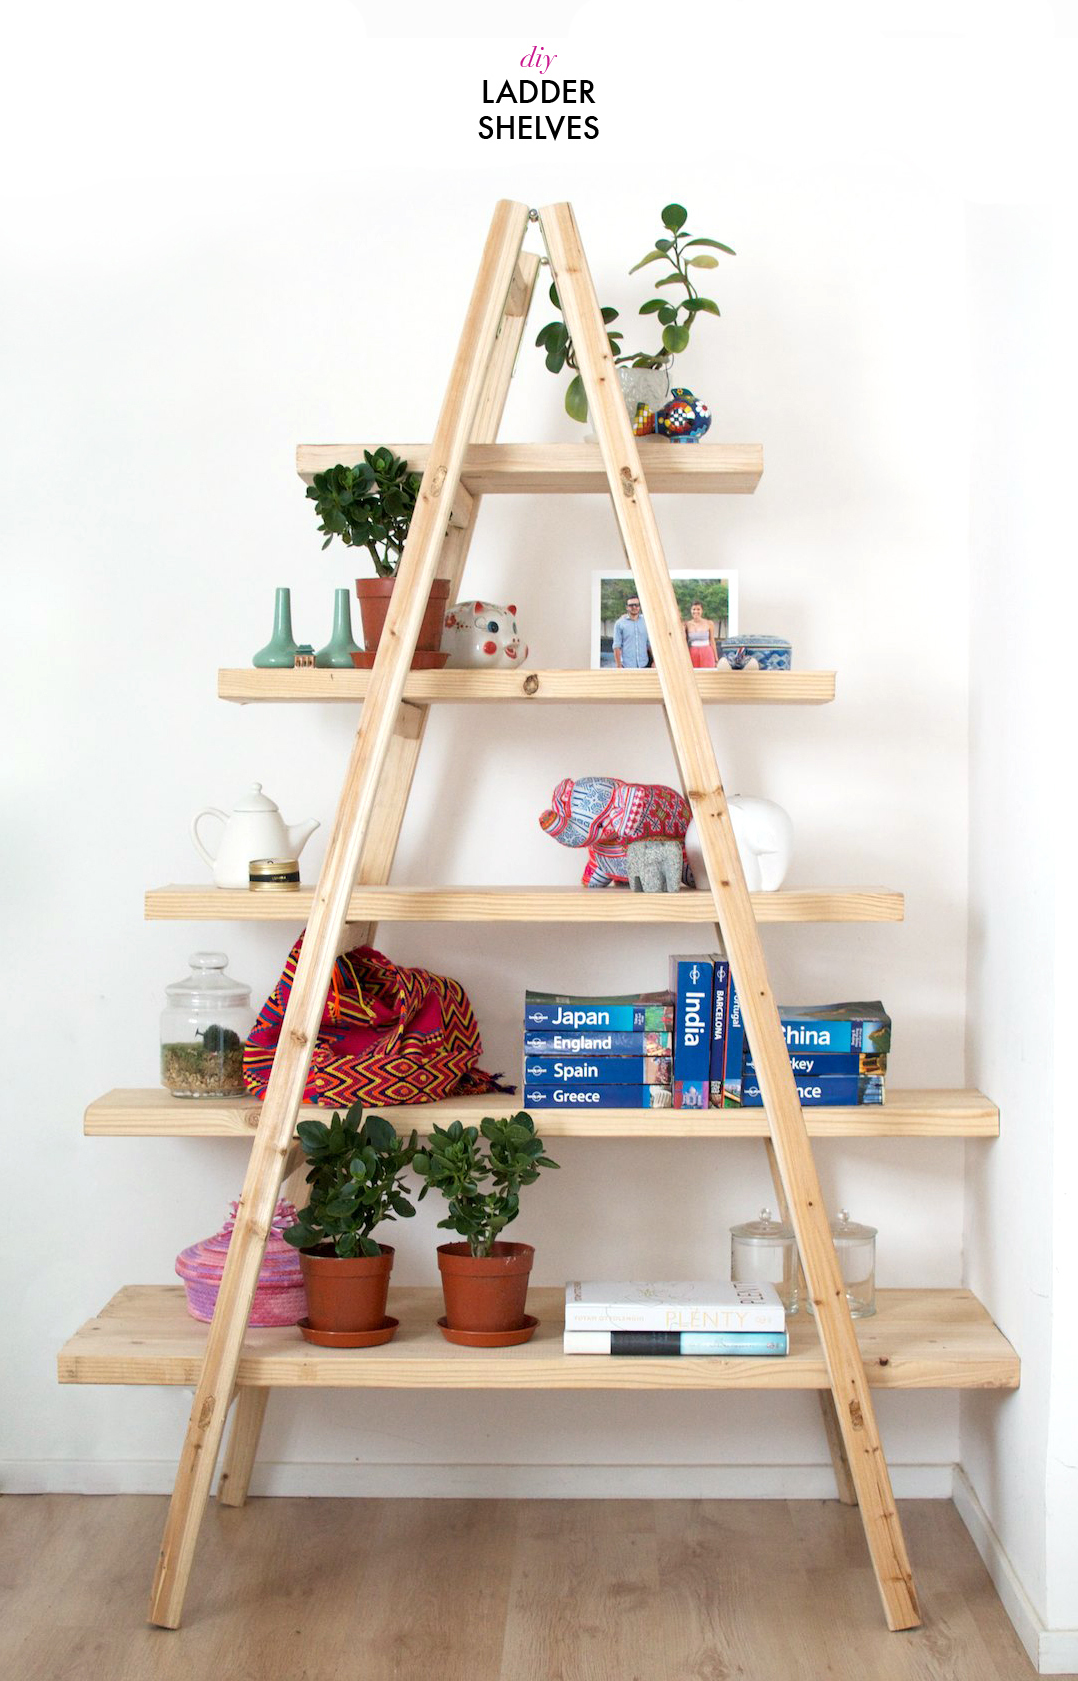 A ladder upcycled into shelves, covered with books and plants and knick knacks. 